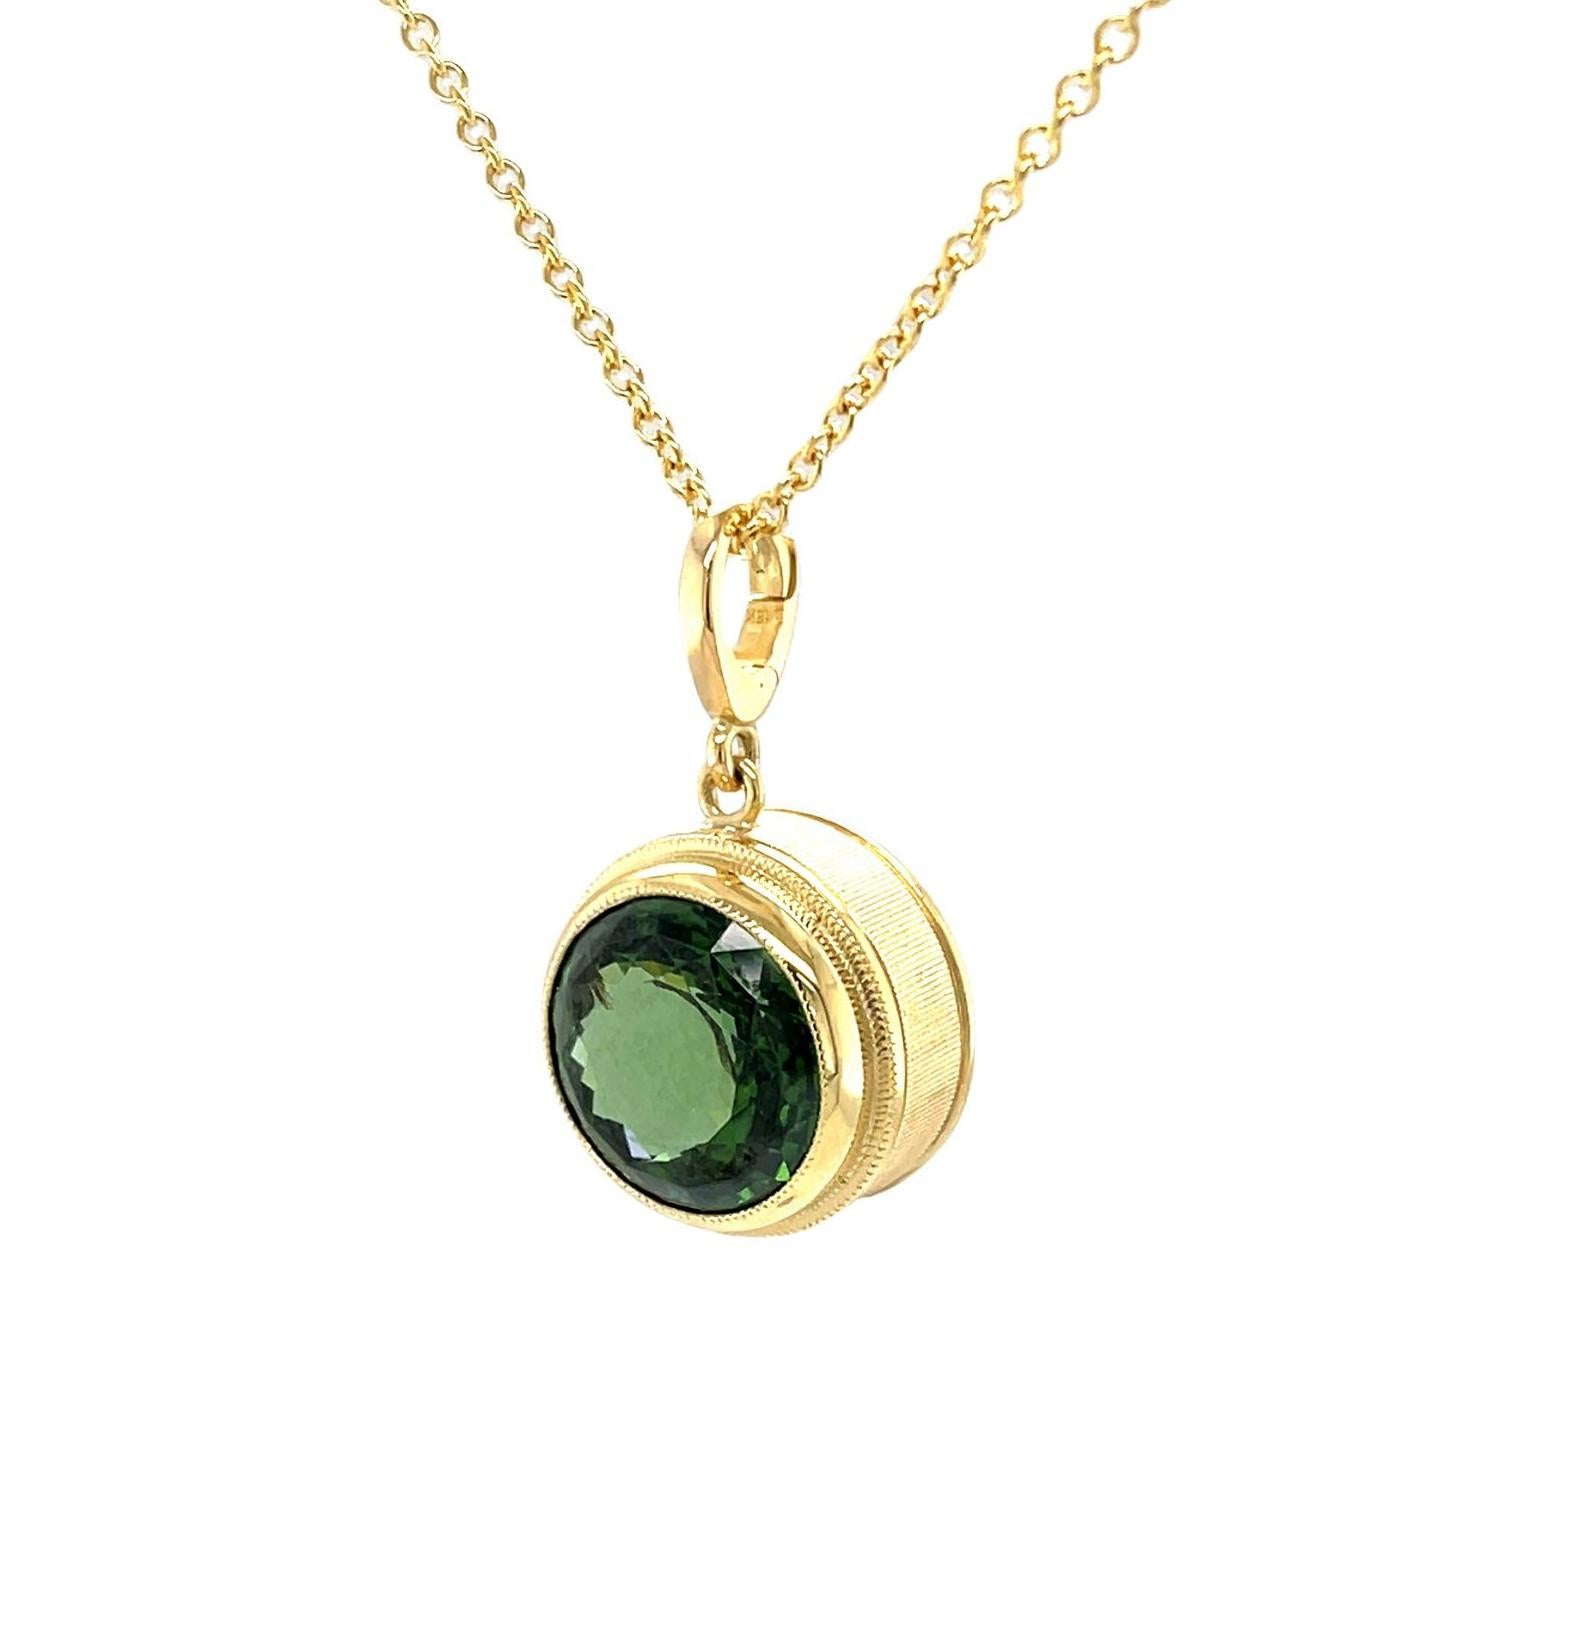 This stunning enhancer pendant features a gorgeous, 8.94 carat round green zircon, set in a custom-designed, hand engraved 18k yellow gold bezel. Zircon is December's birthstone and comes in a rainbow of beautiful color. This green zircon is of